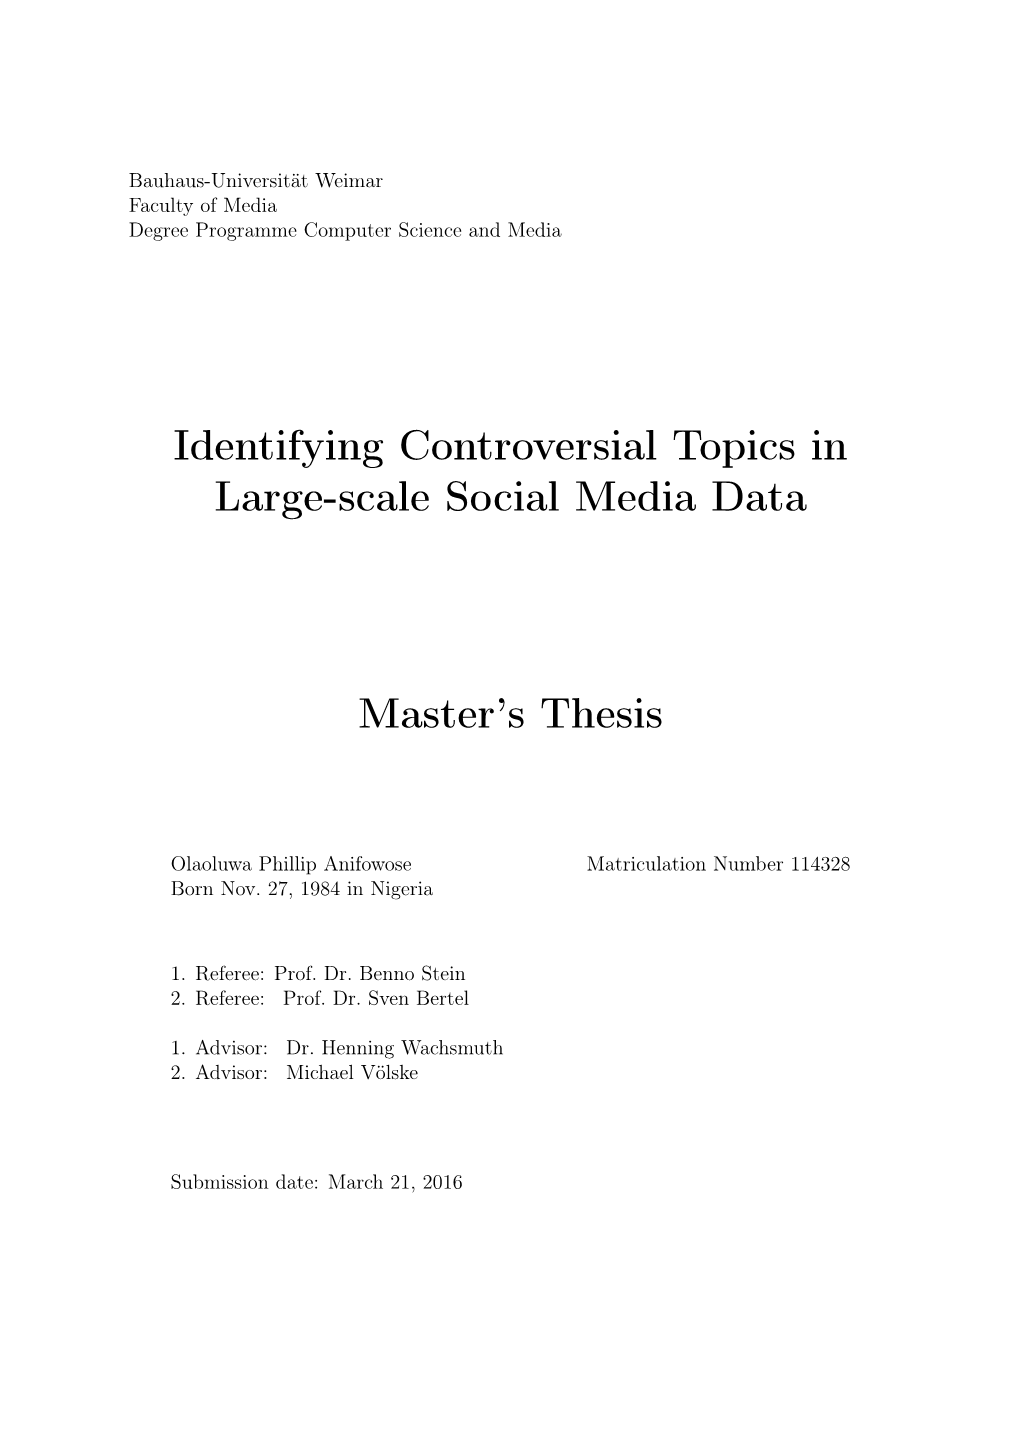 Identifying Controversial Topics in Large-Scale Social Media Data